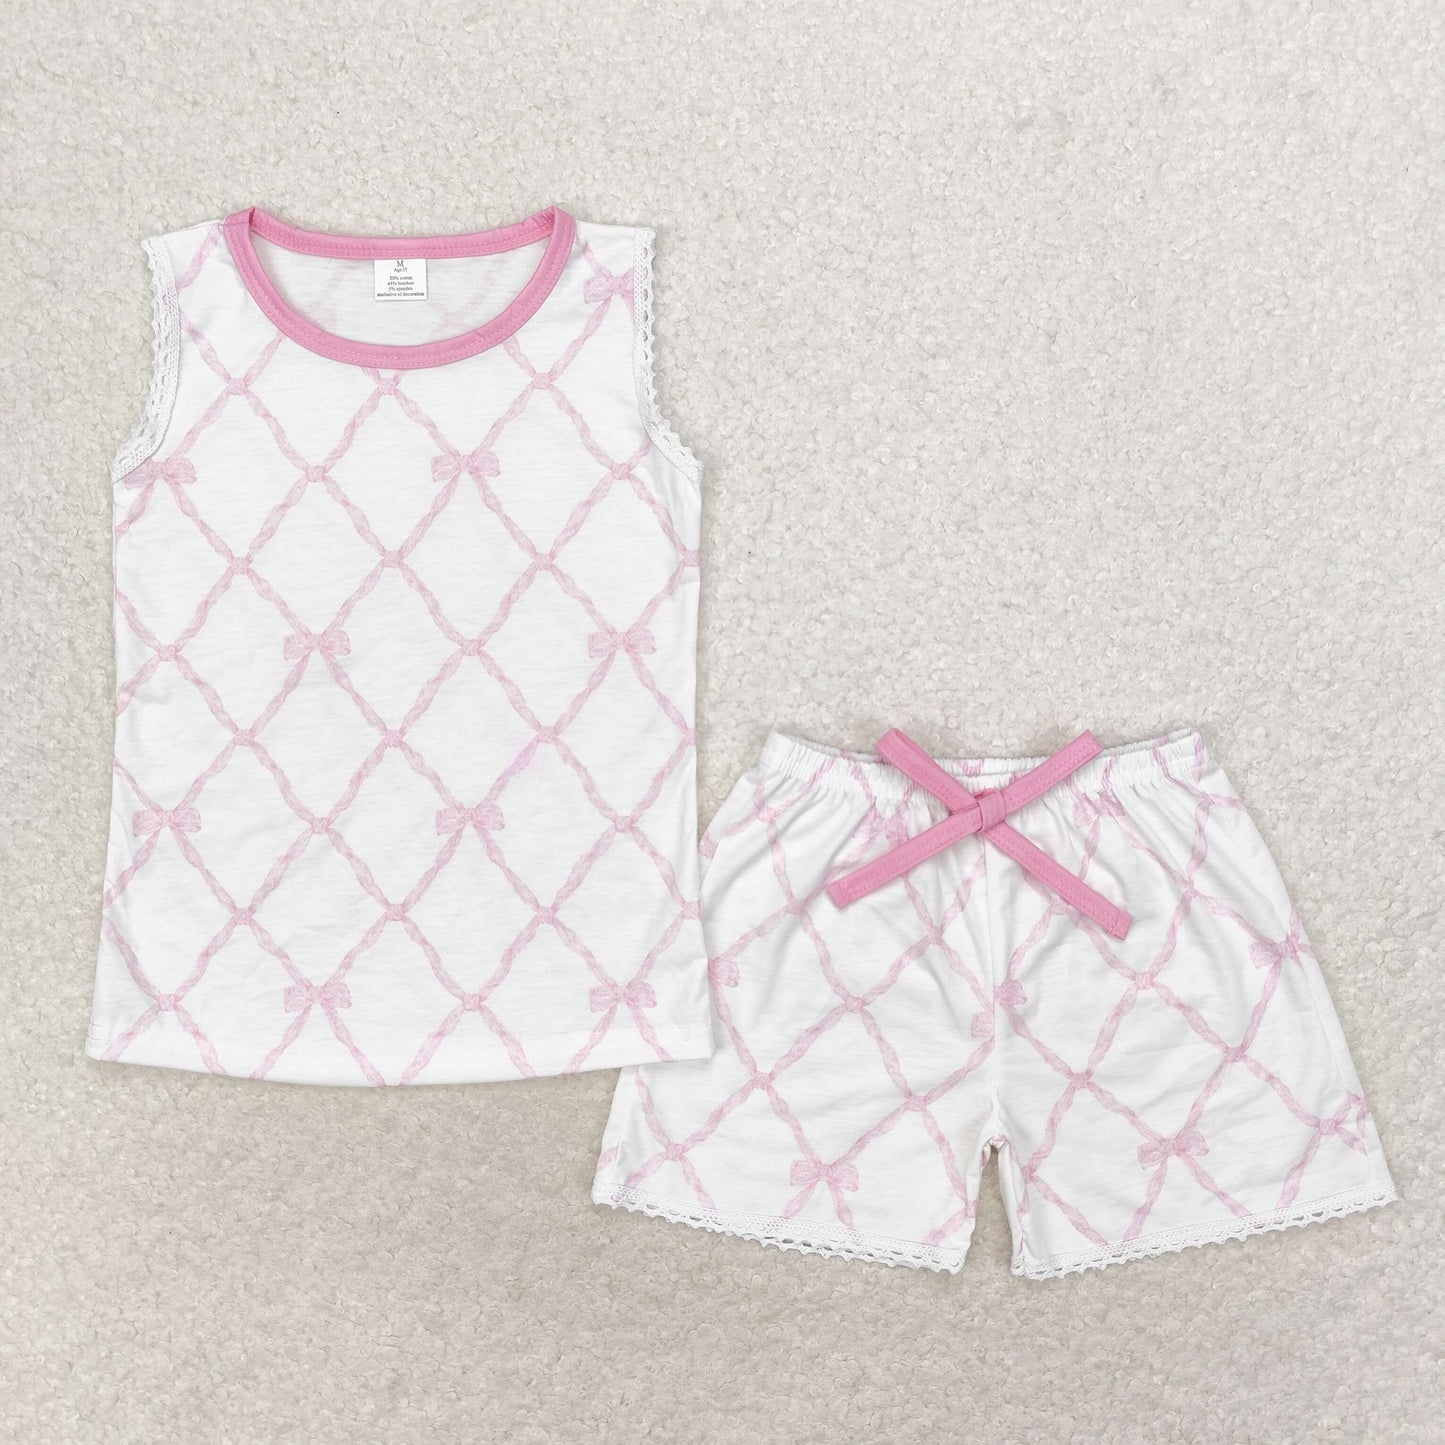 Baby Girls Summer Pink Bow Shorts Outfit